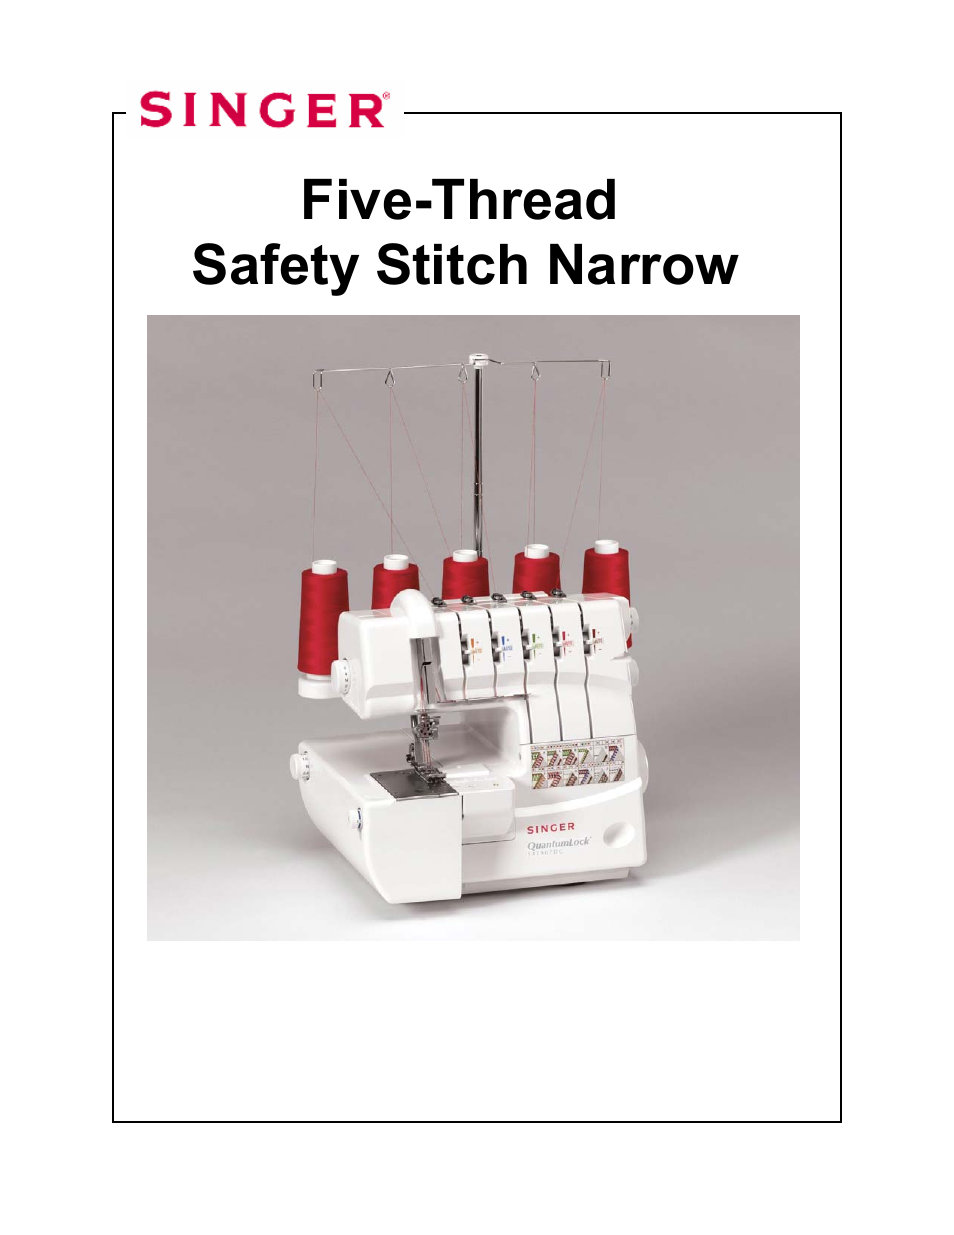 10_5_safe_narrow, Five-thread safety stitch narrow | SINGER 14T967DC-WORKBOOK QUANTUMLOCK User Manual | Page 159 / 230